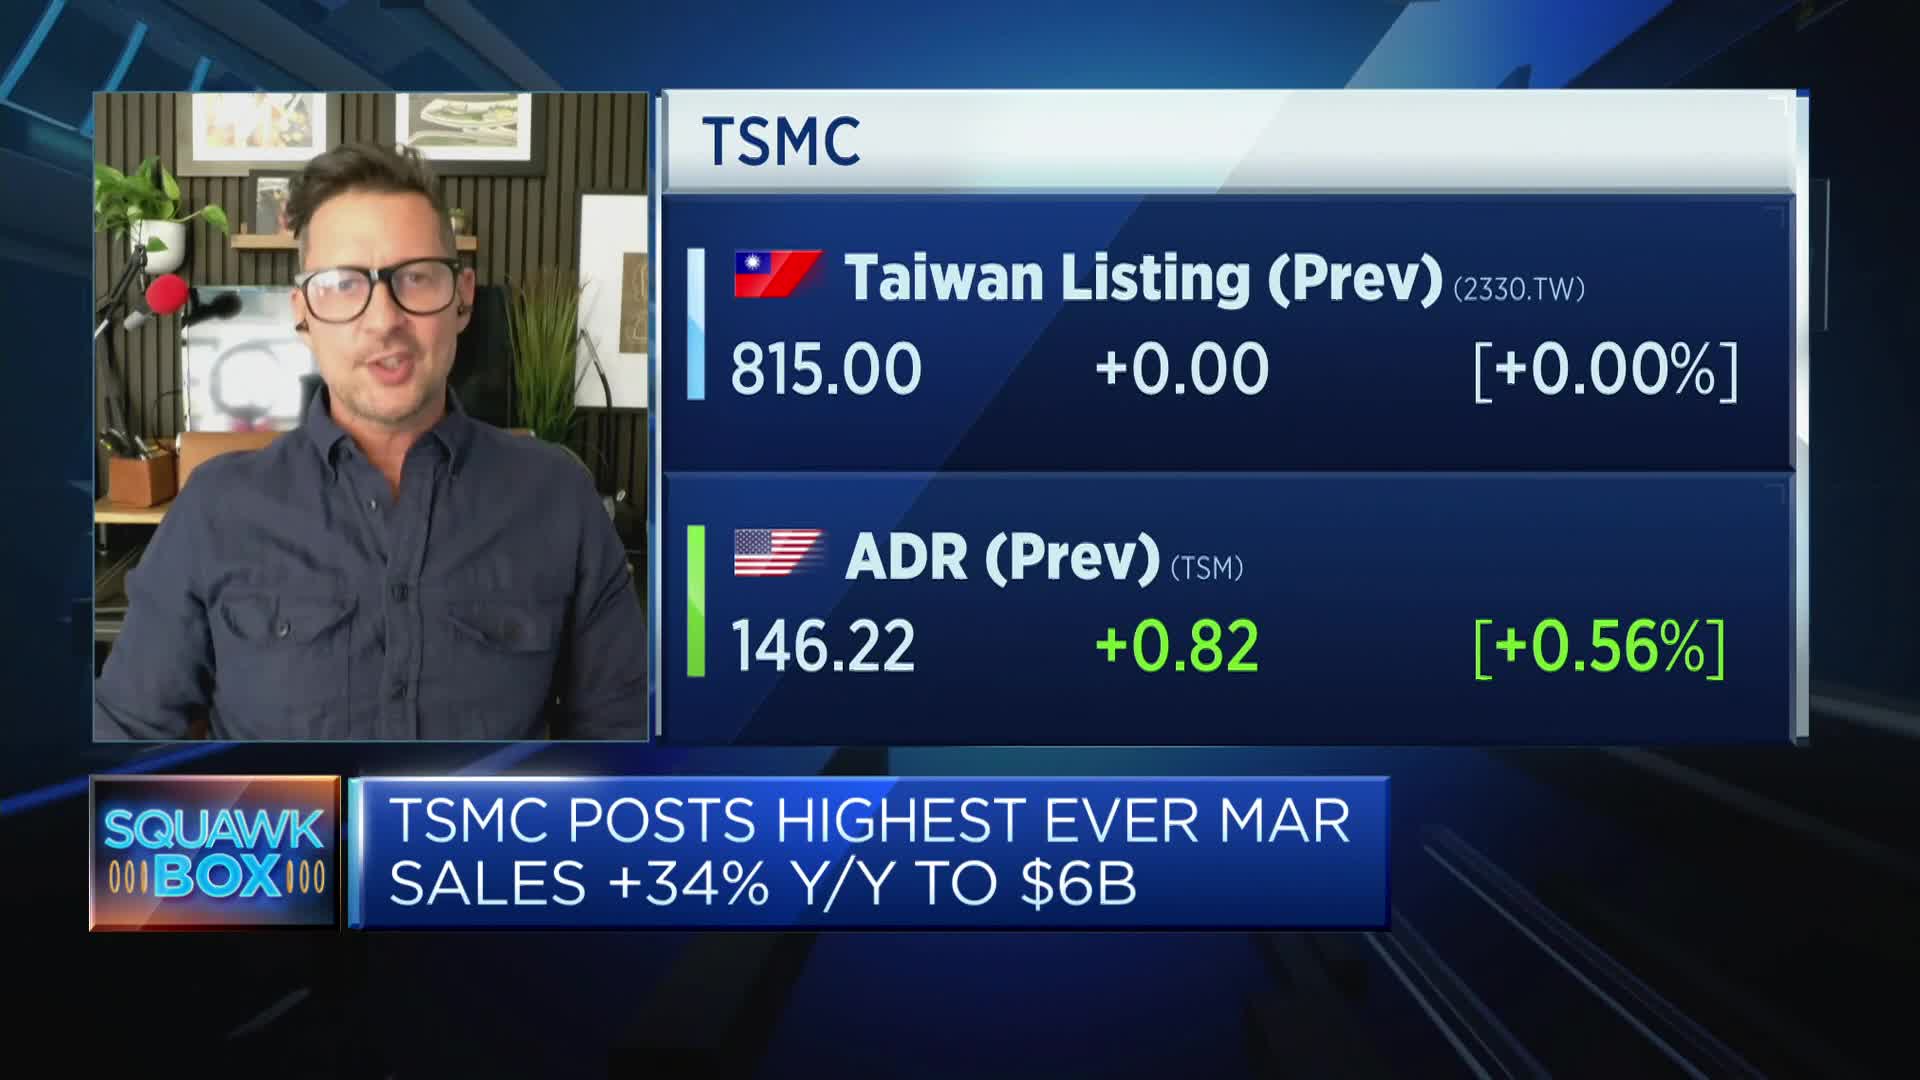 'It's all upside' for TSMC and other chipmakers over the next decade, advisory firm says